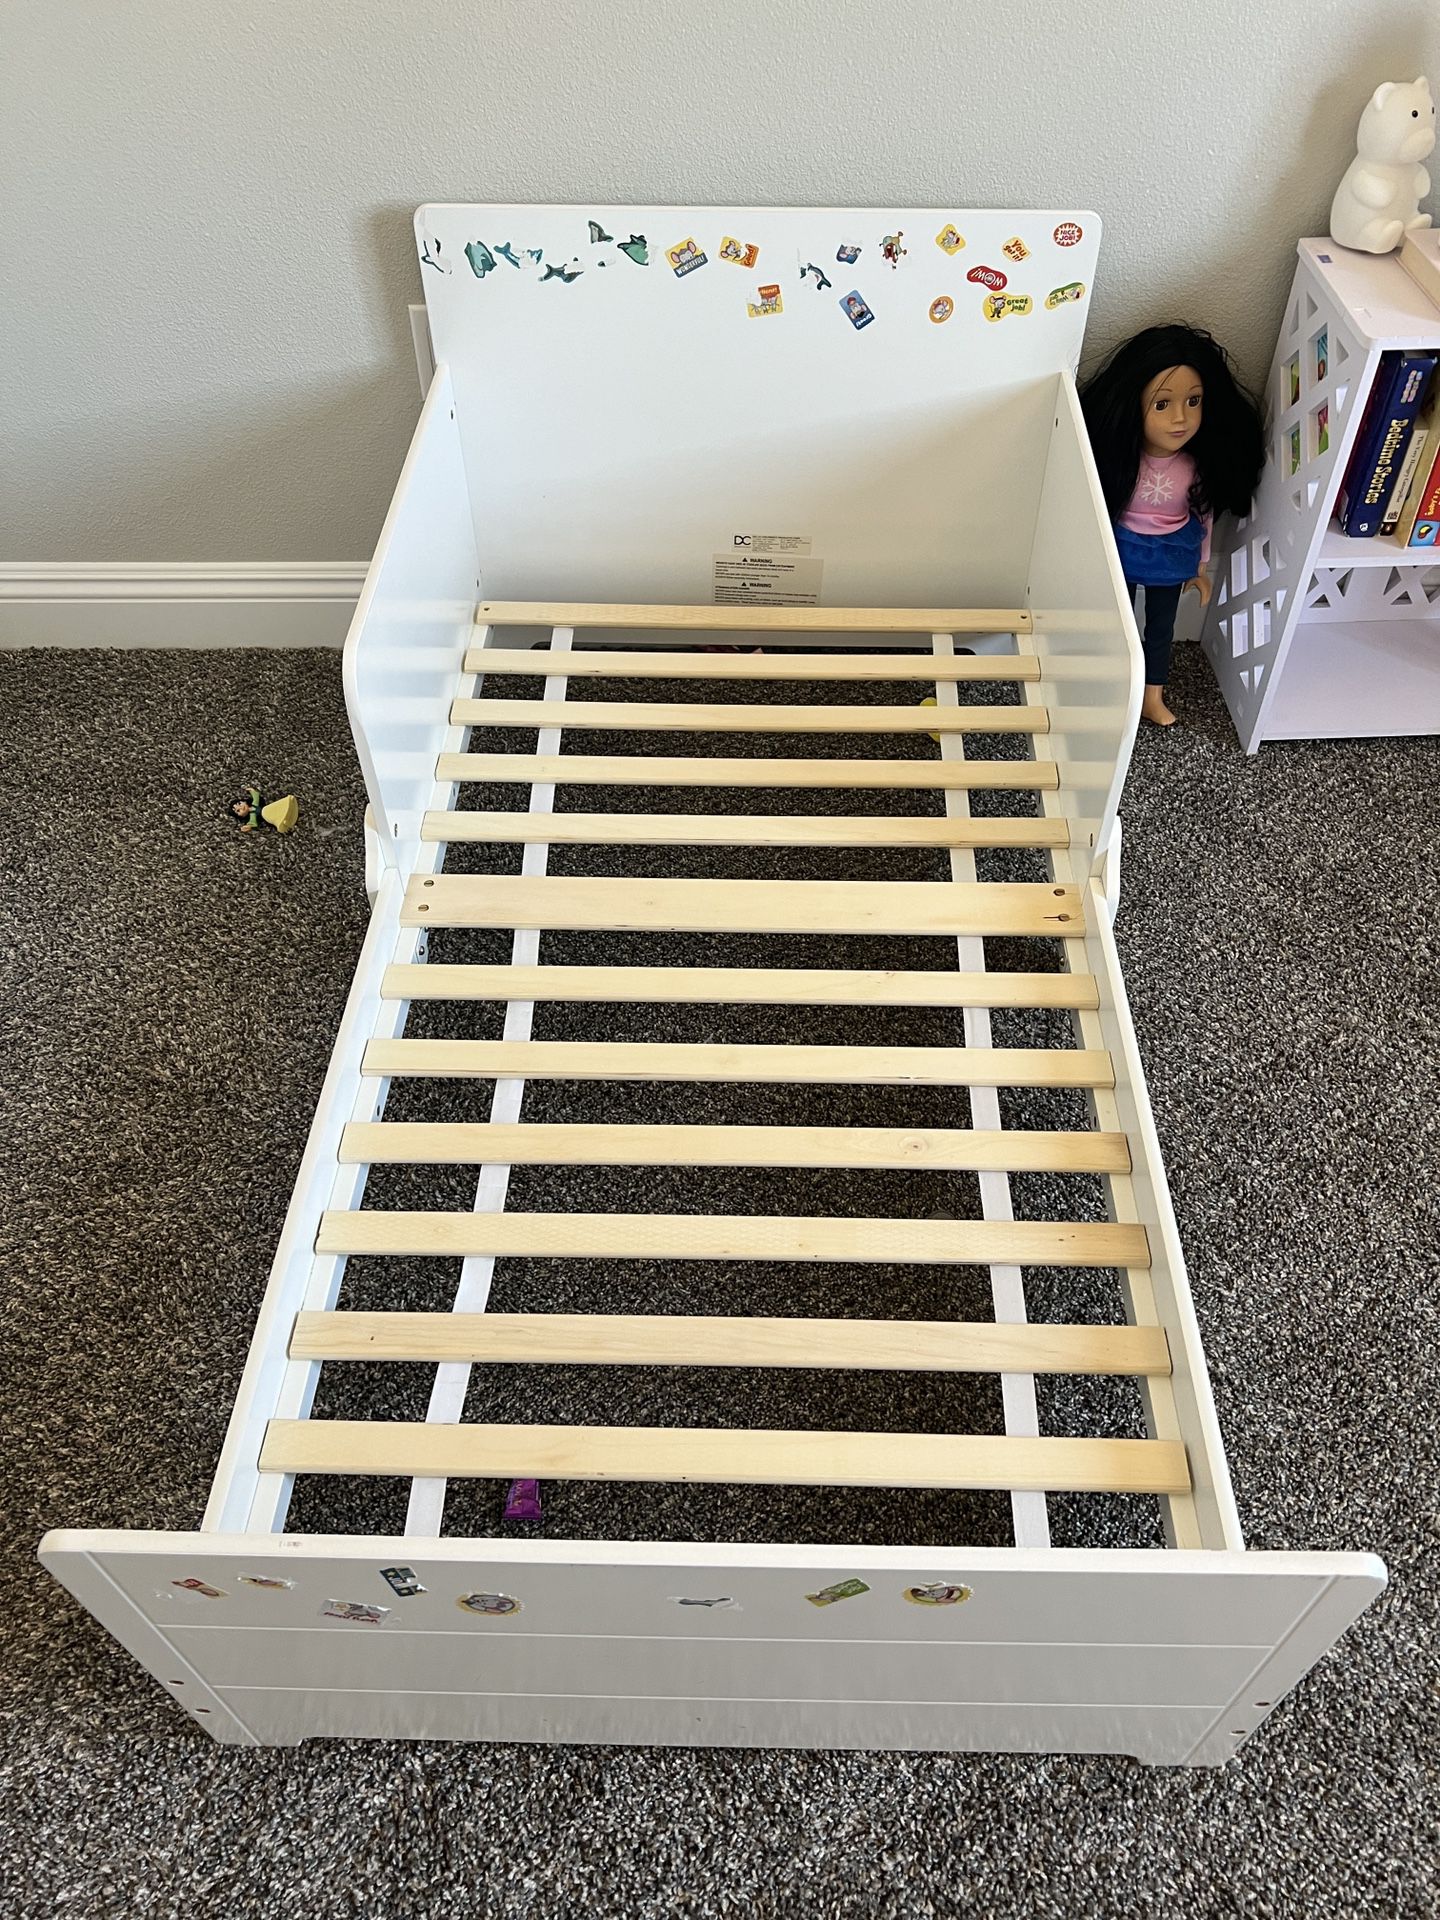 Toddlers Bed frames With Mattress 